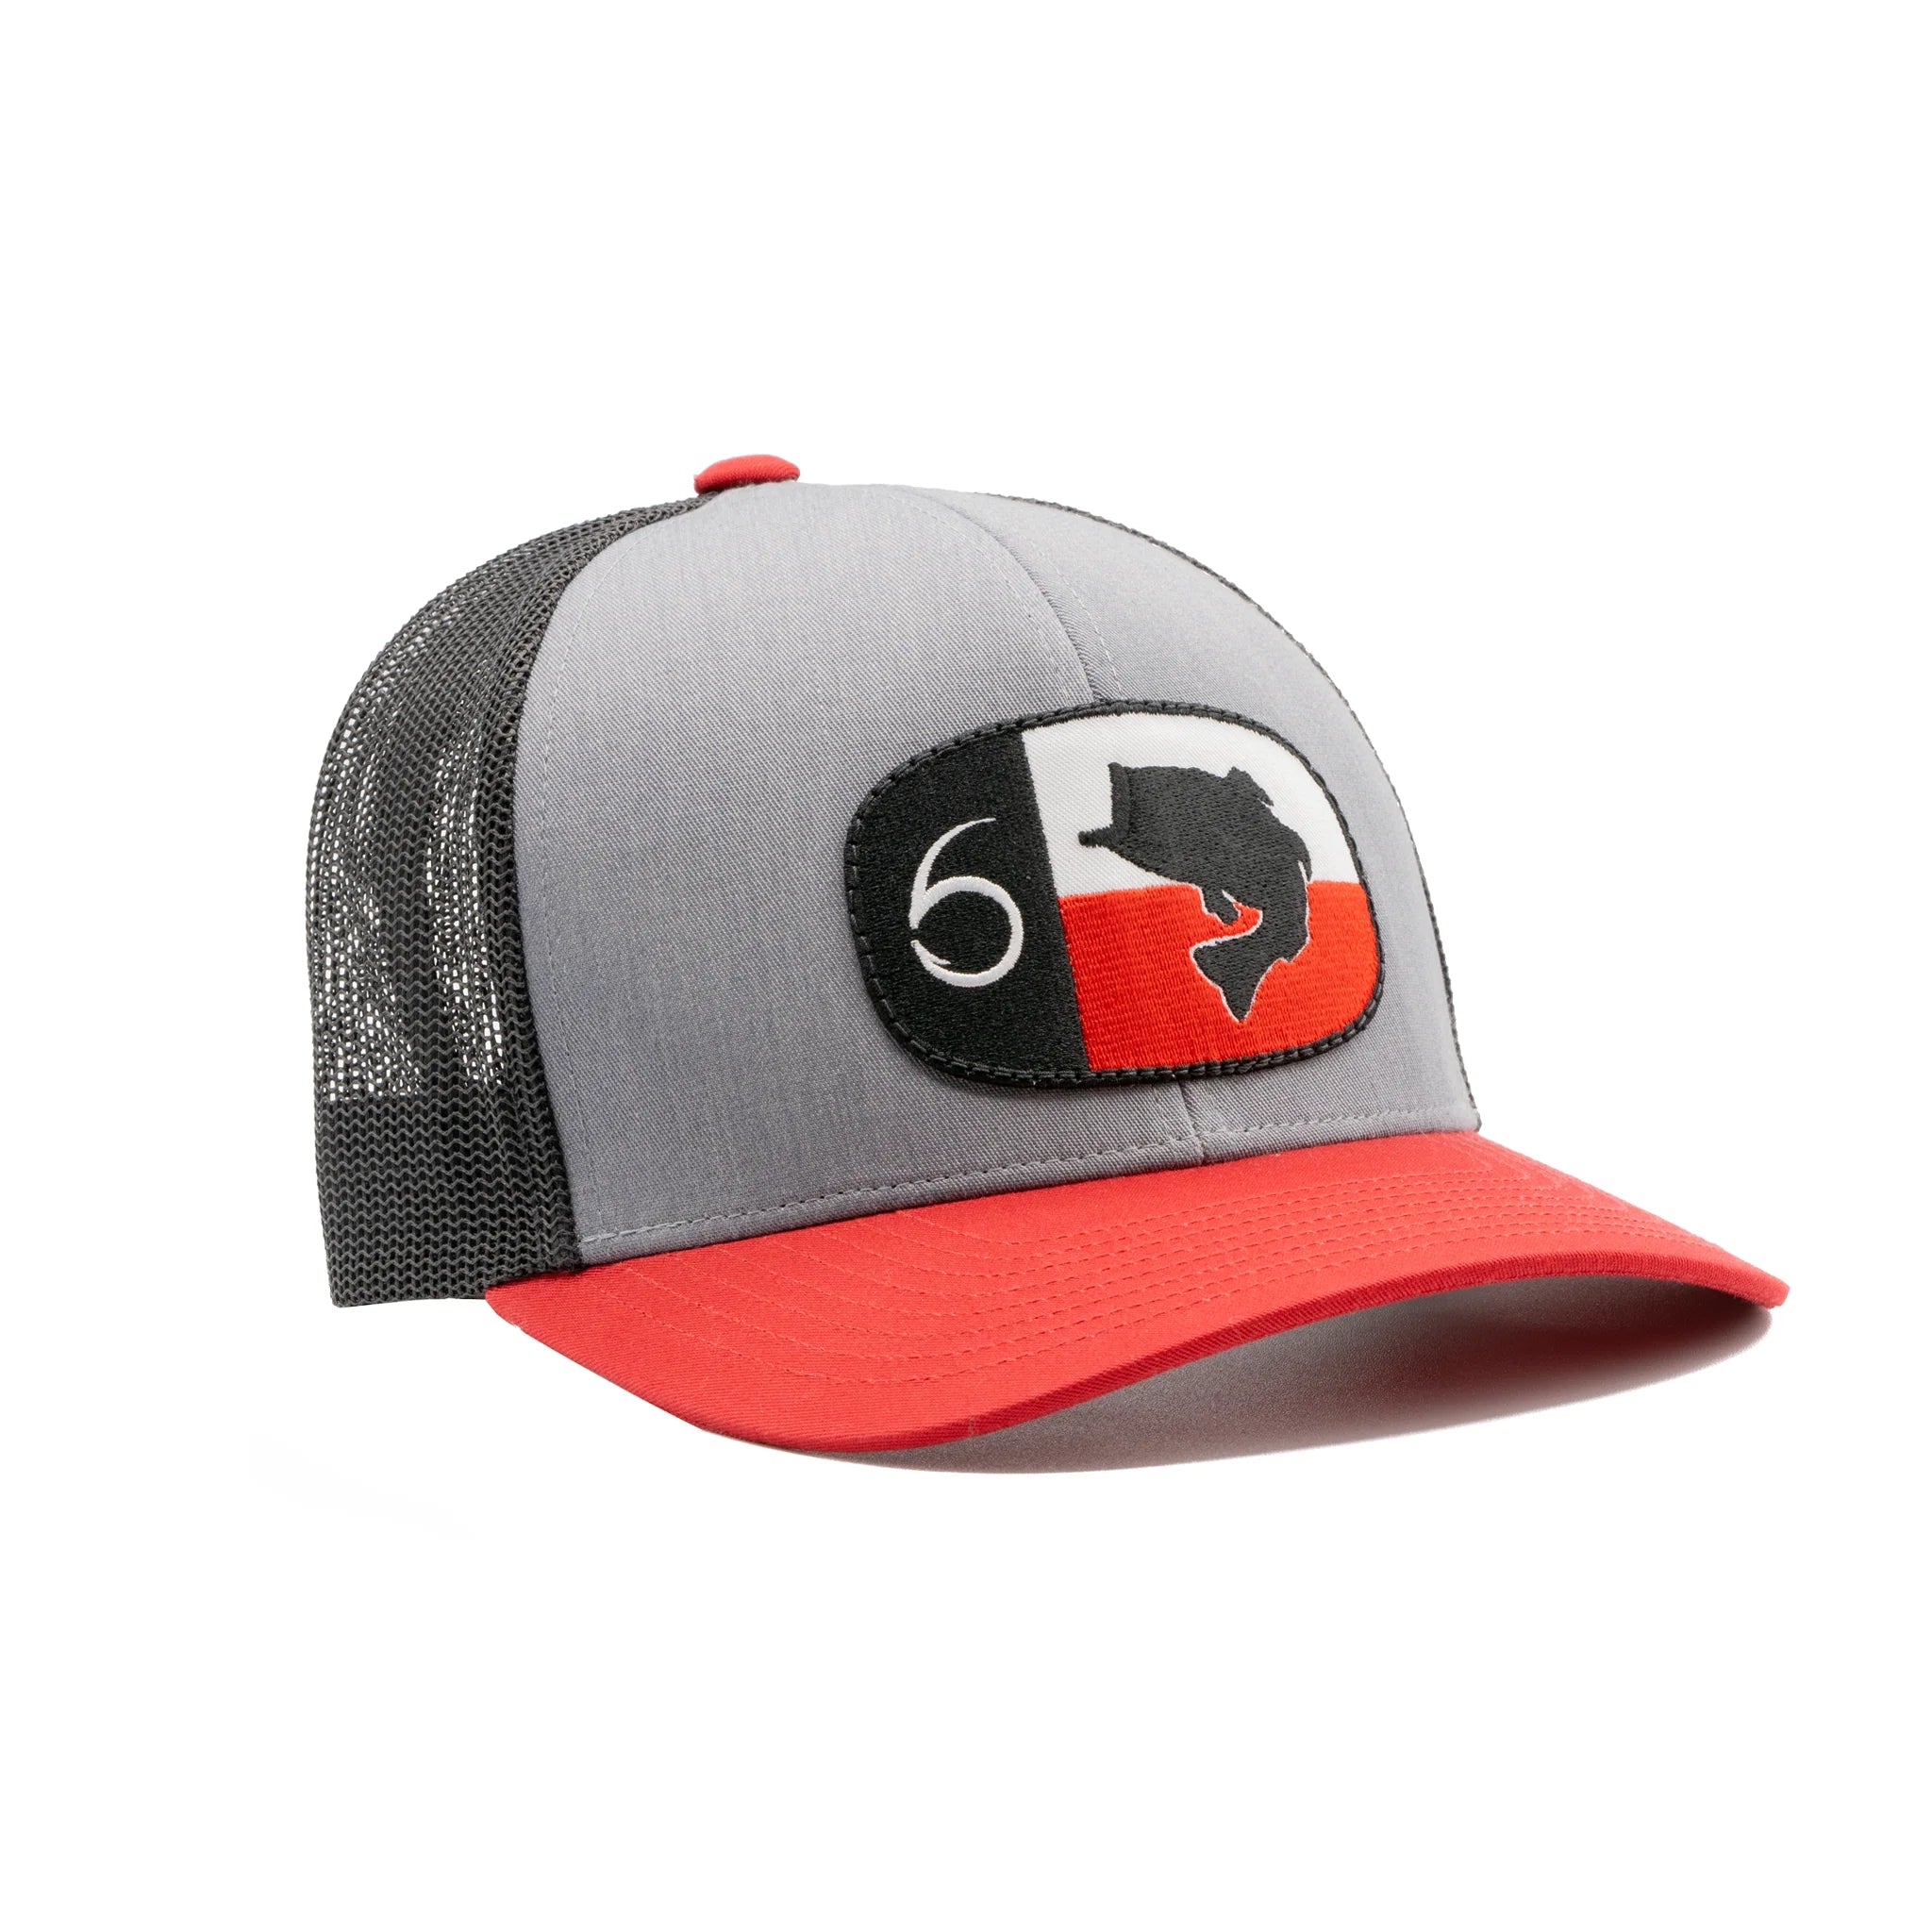 Texas Lunker - Gray/Black/Red